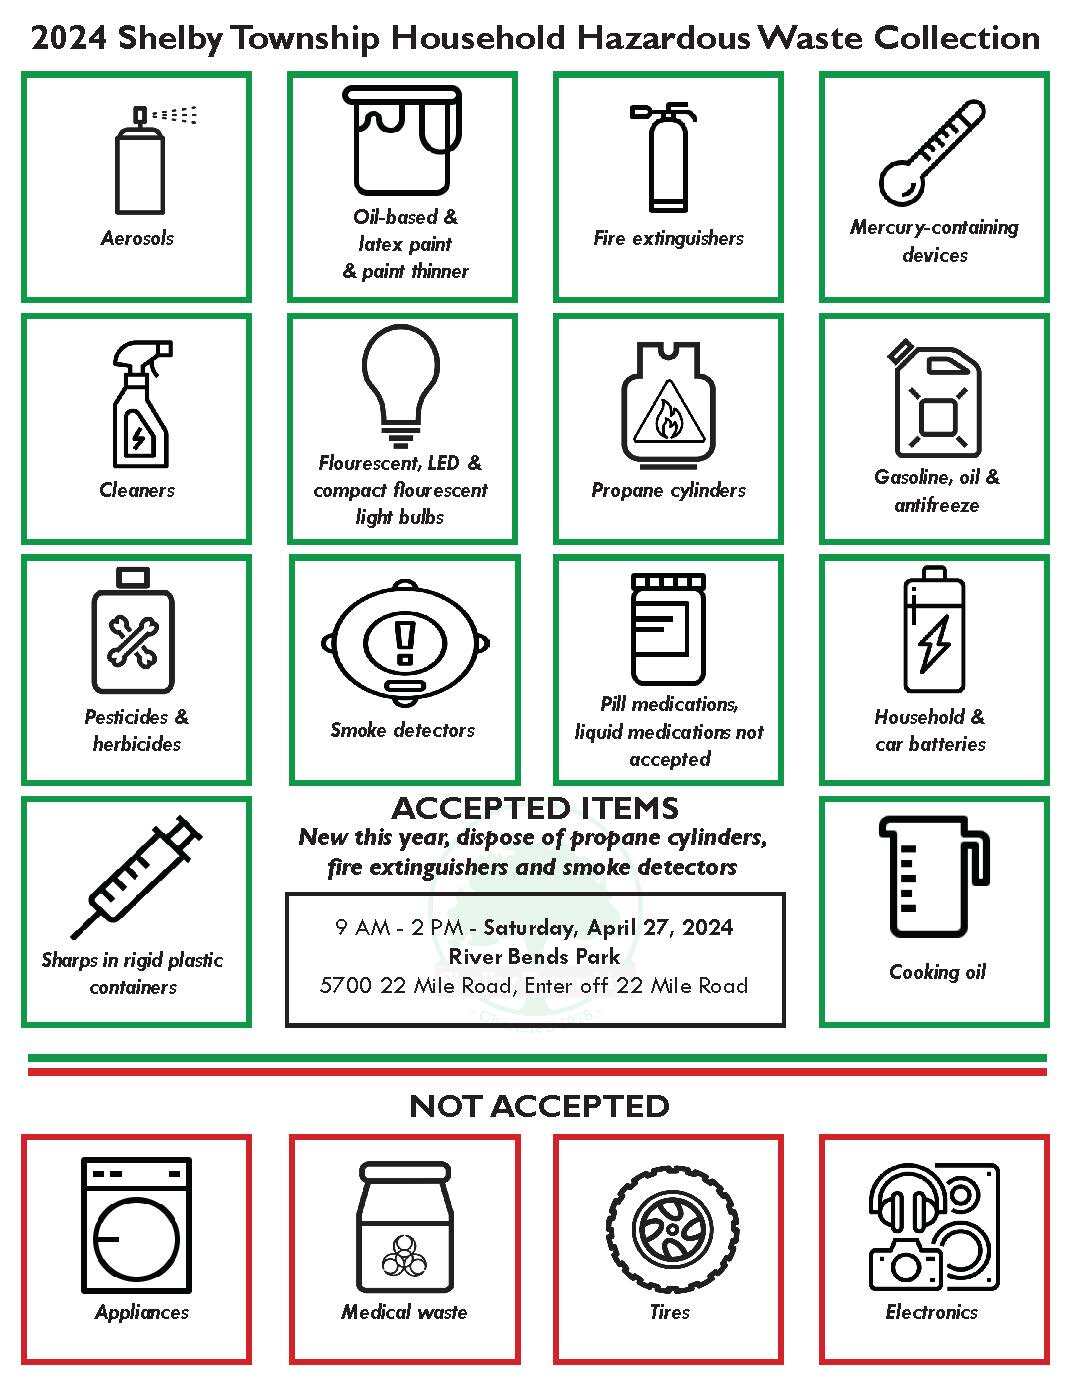 2024 Shelby Township Household Hazardous Waste Collection